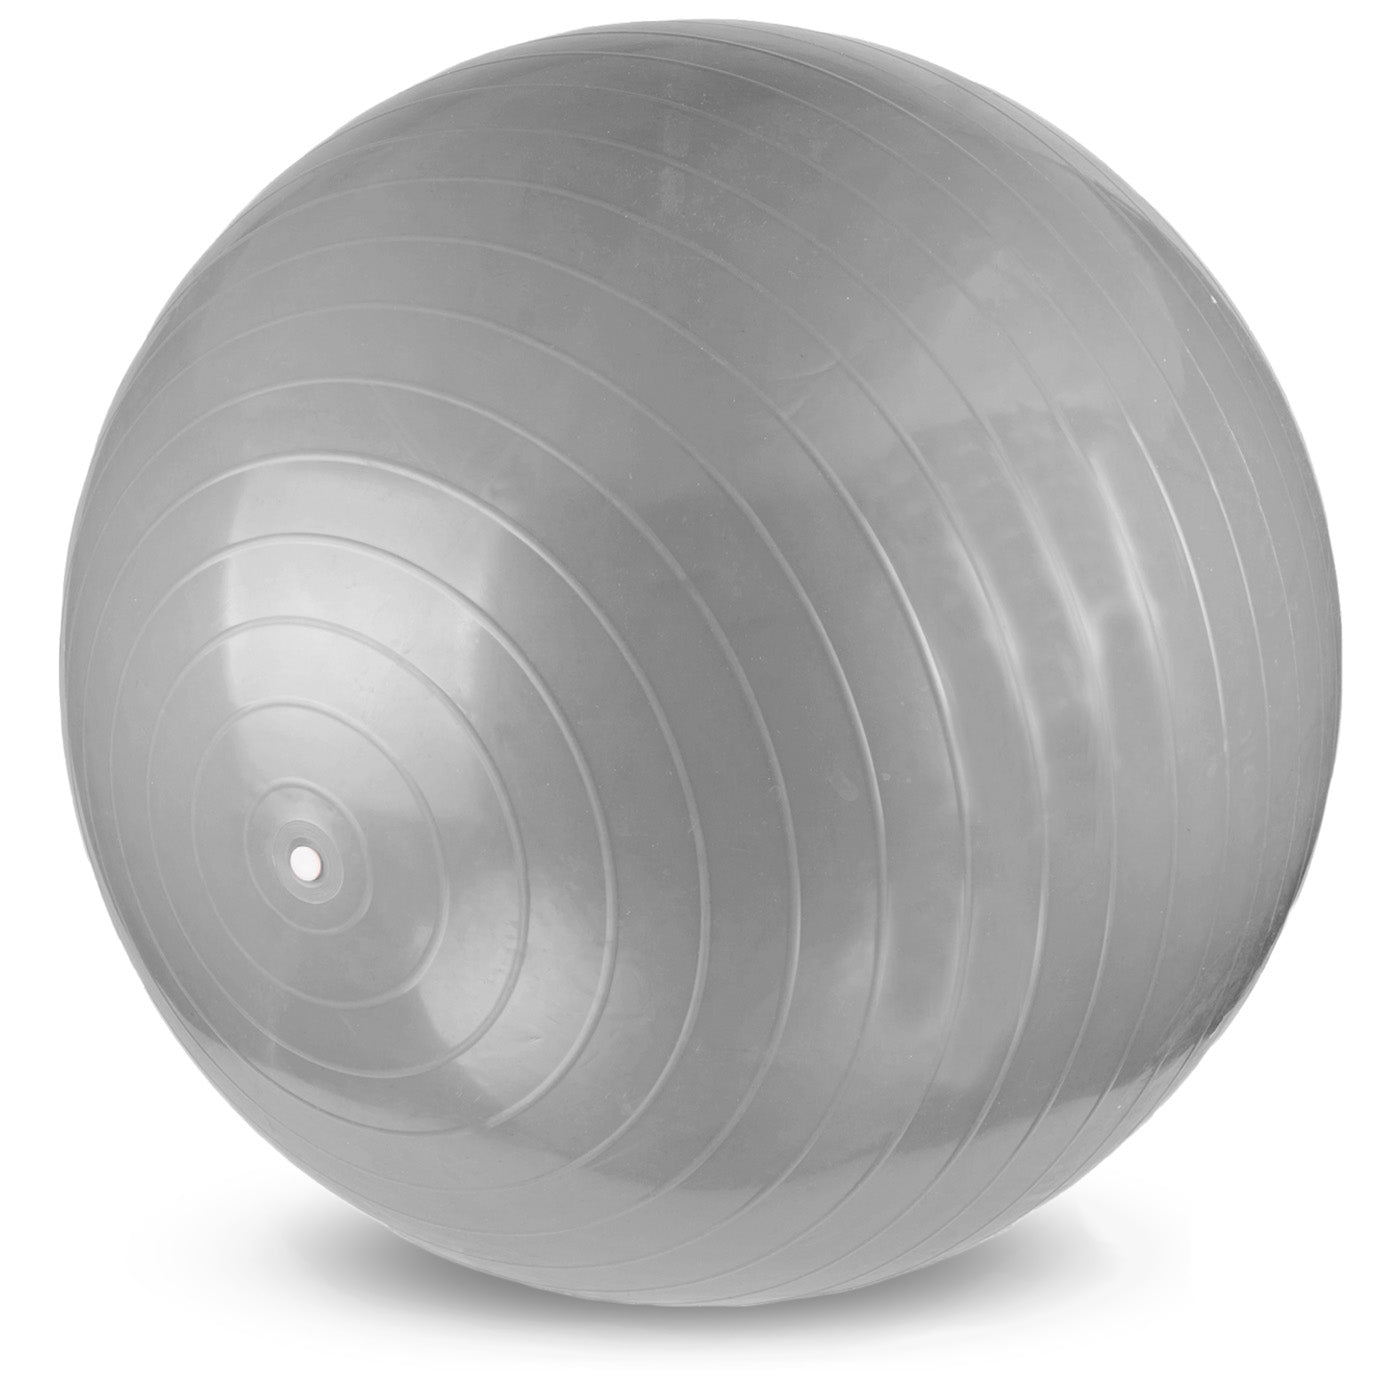 EconoFitness Anti-Burst Fitness Ball - 65cm - Burst-Resistant, Anti-Slip,  Pump Included, Great for Balance, Home Workouts, Yoga. (Grey, 65cm) :  : Sports & Outdoors